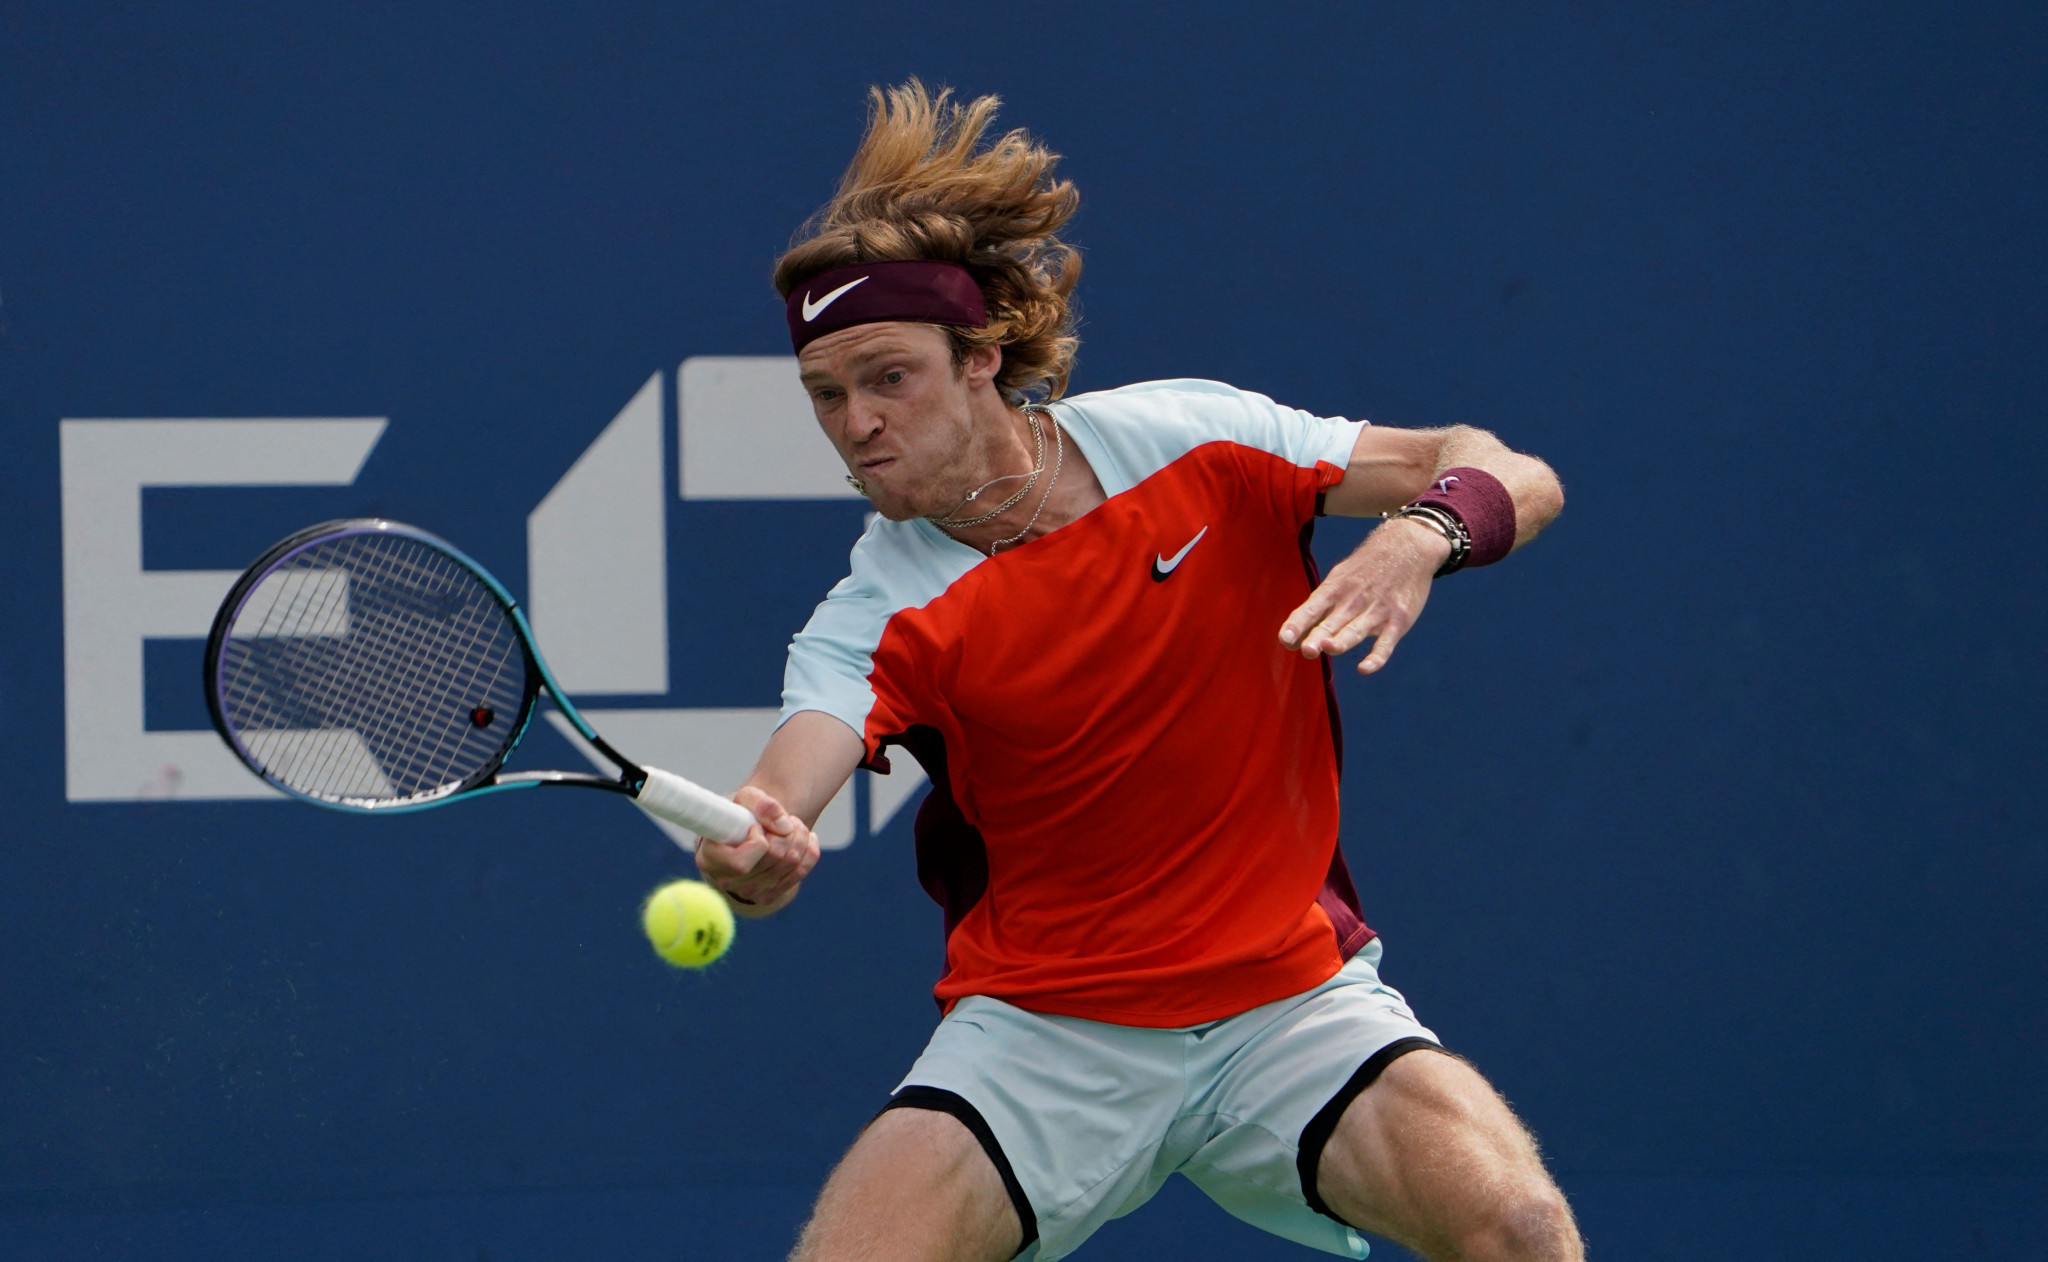 Russia's Andrey Rublev, competing as a neutral, beat Canada's Denis Shapovalov in five sets ©Getty Images